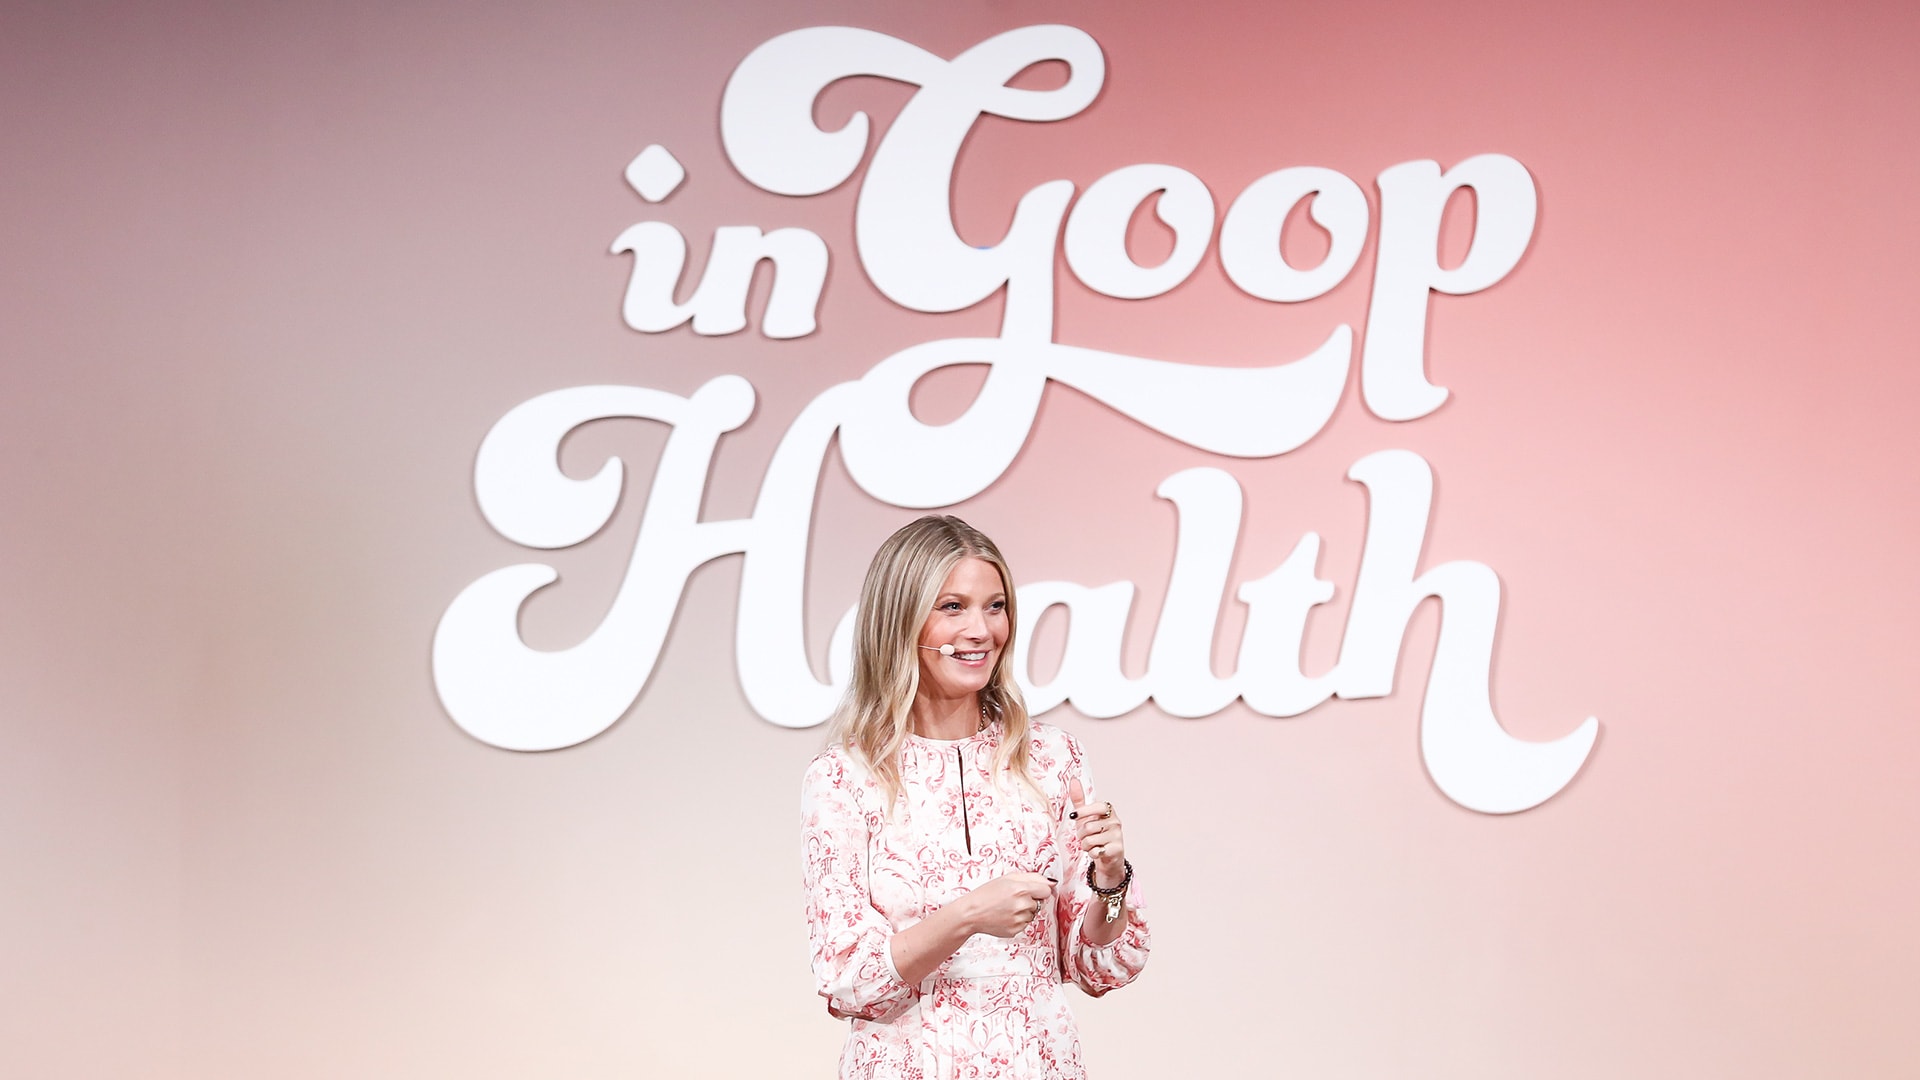 Gwyneth Paltrow’s Goop Conference Was As Kooky As You Expected It To Be–And That’s Exactly What Fans Wanted